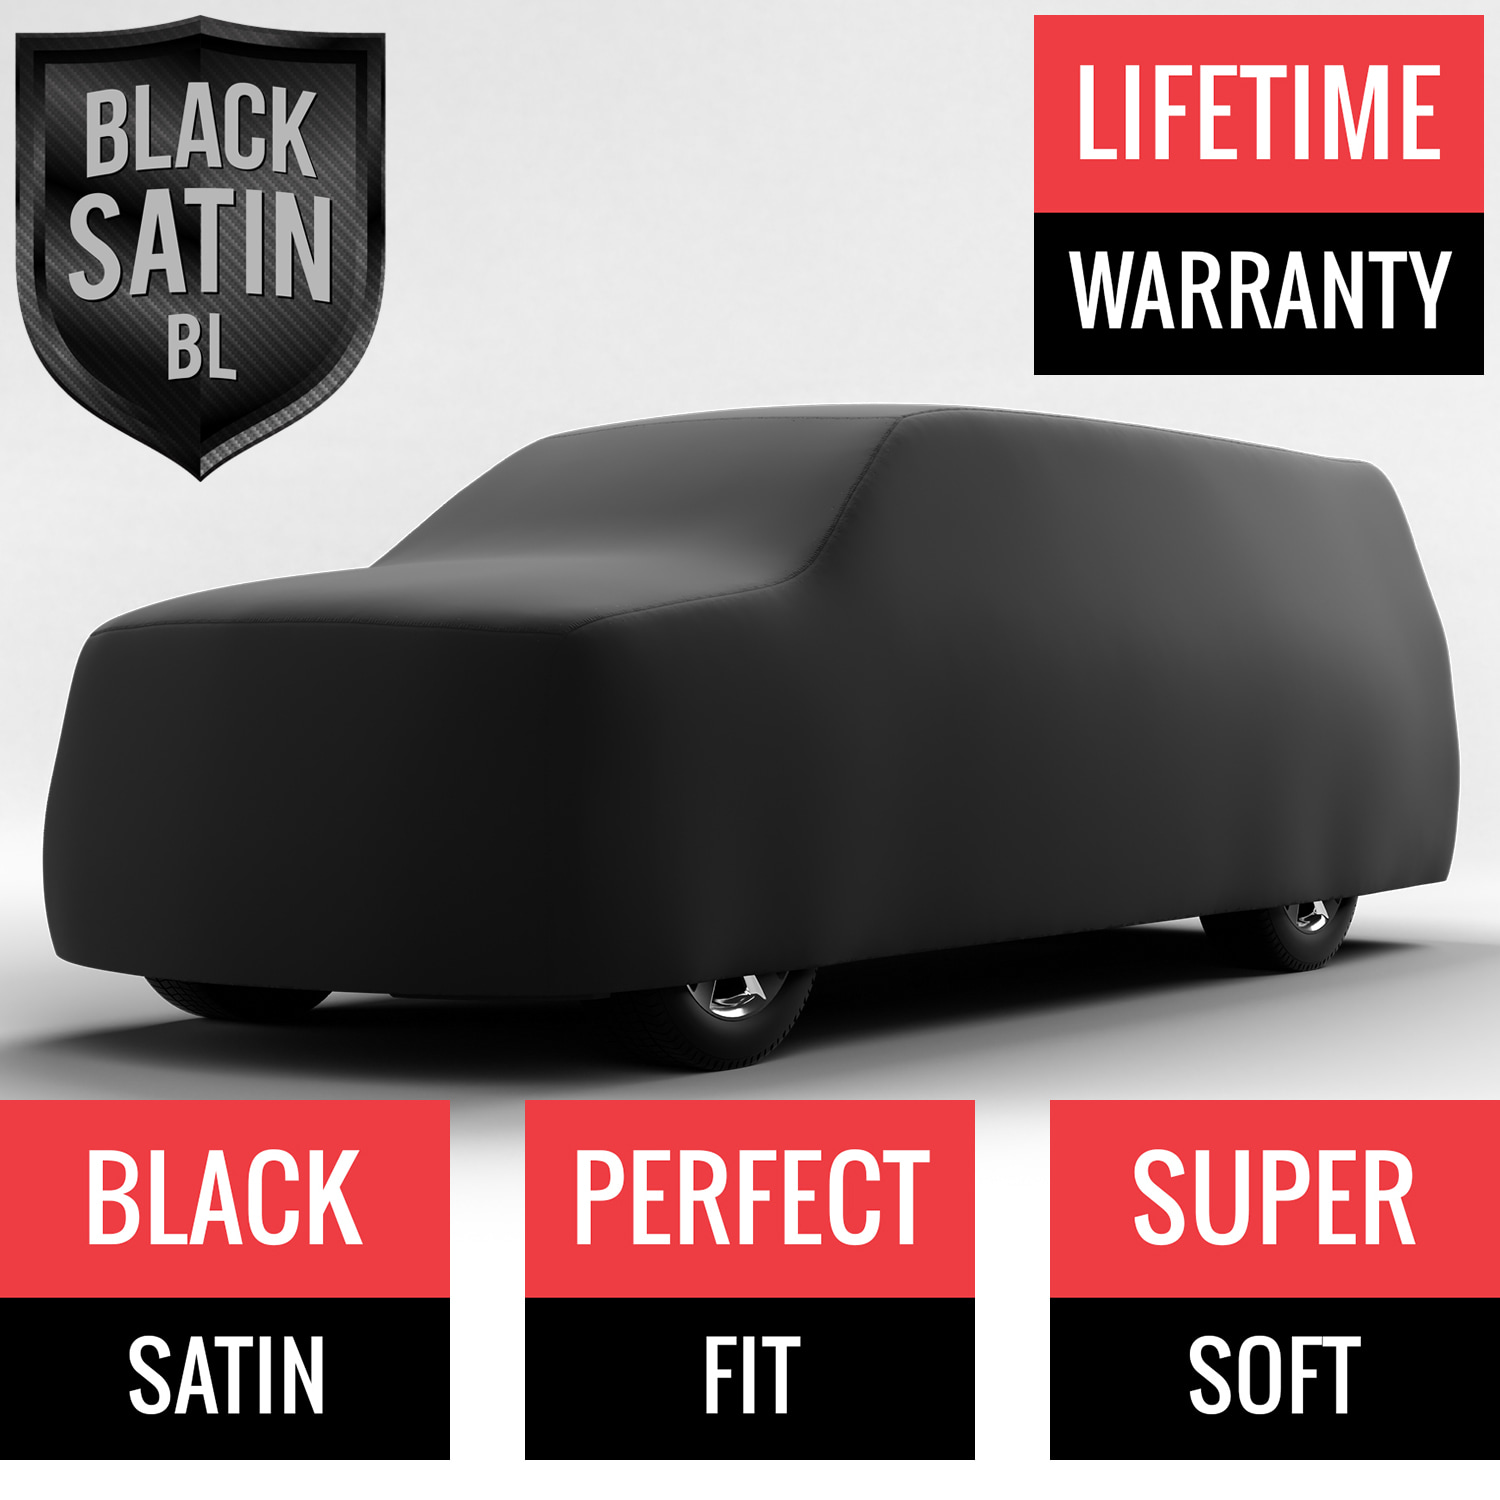 Black Satin BL - Black Car Cover for GMC C1500 1997 Extended Cab Pickup 6.5 Feet Bed with Camper Shell